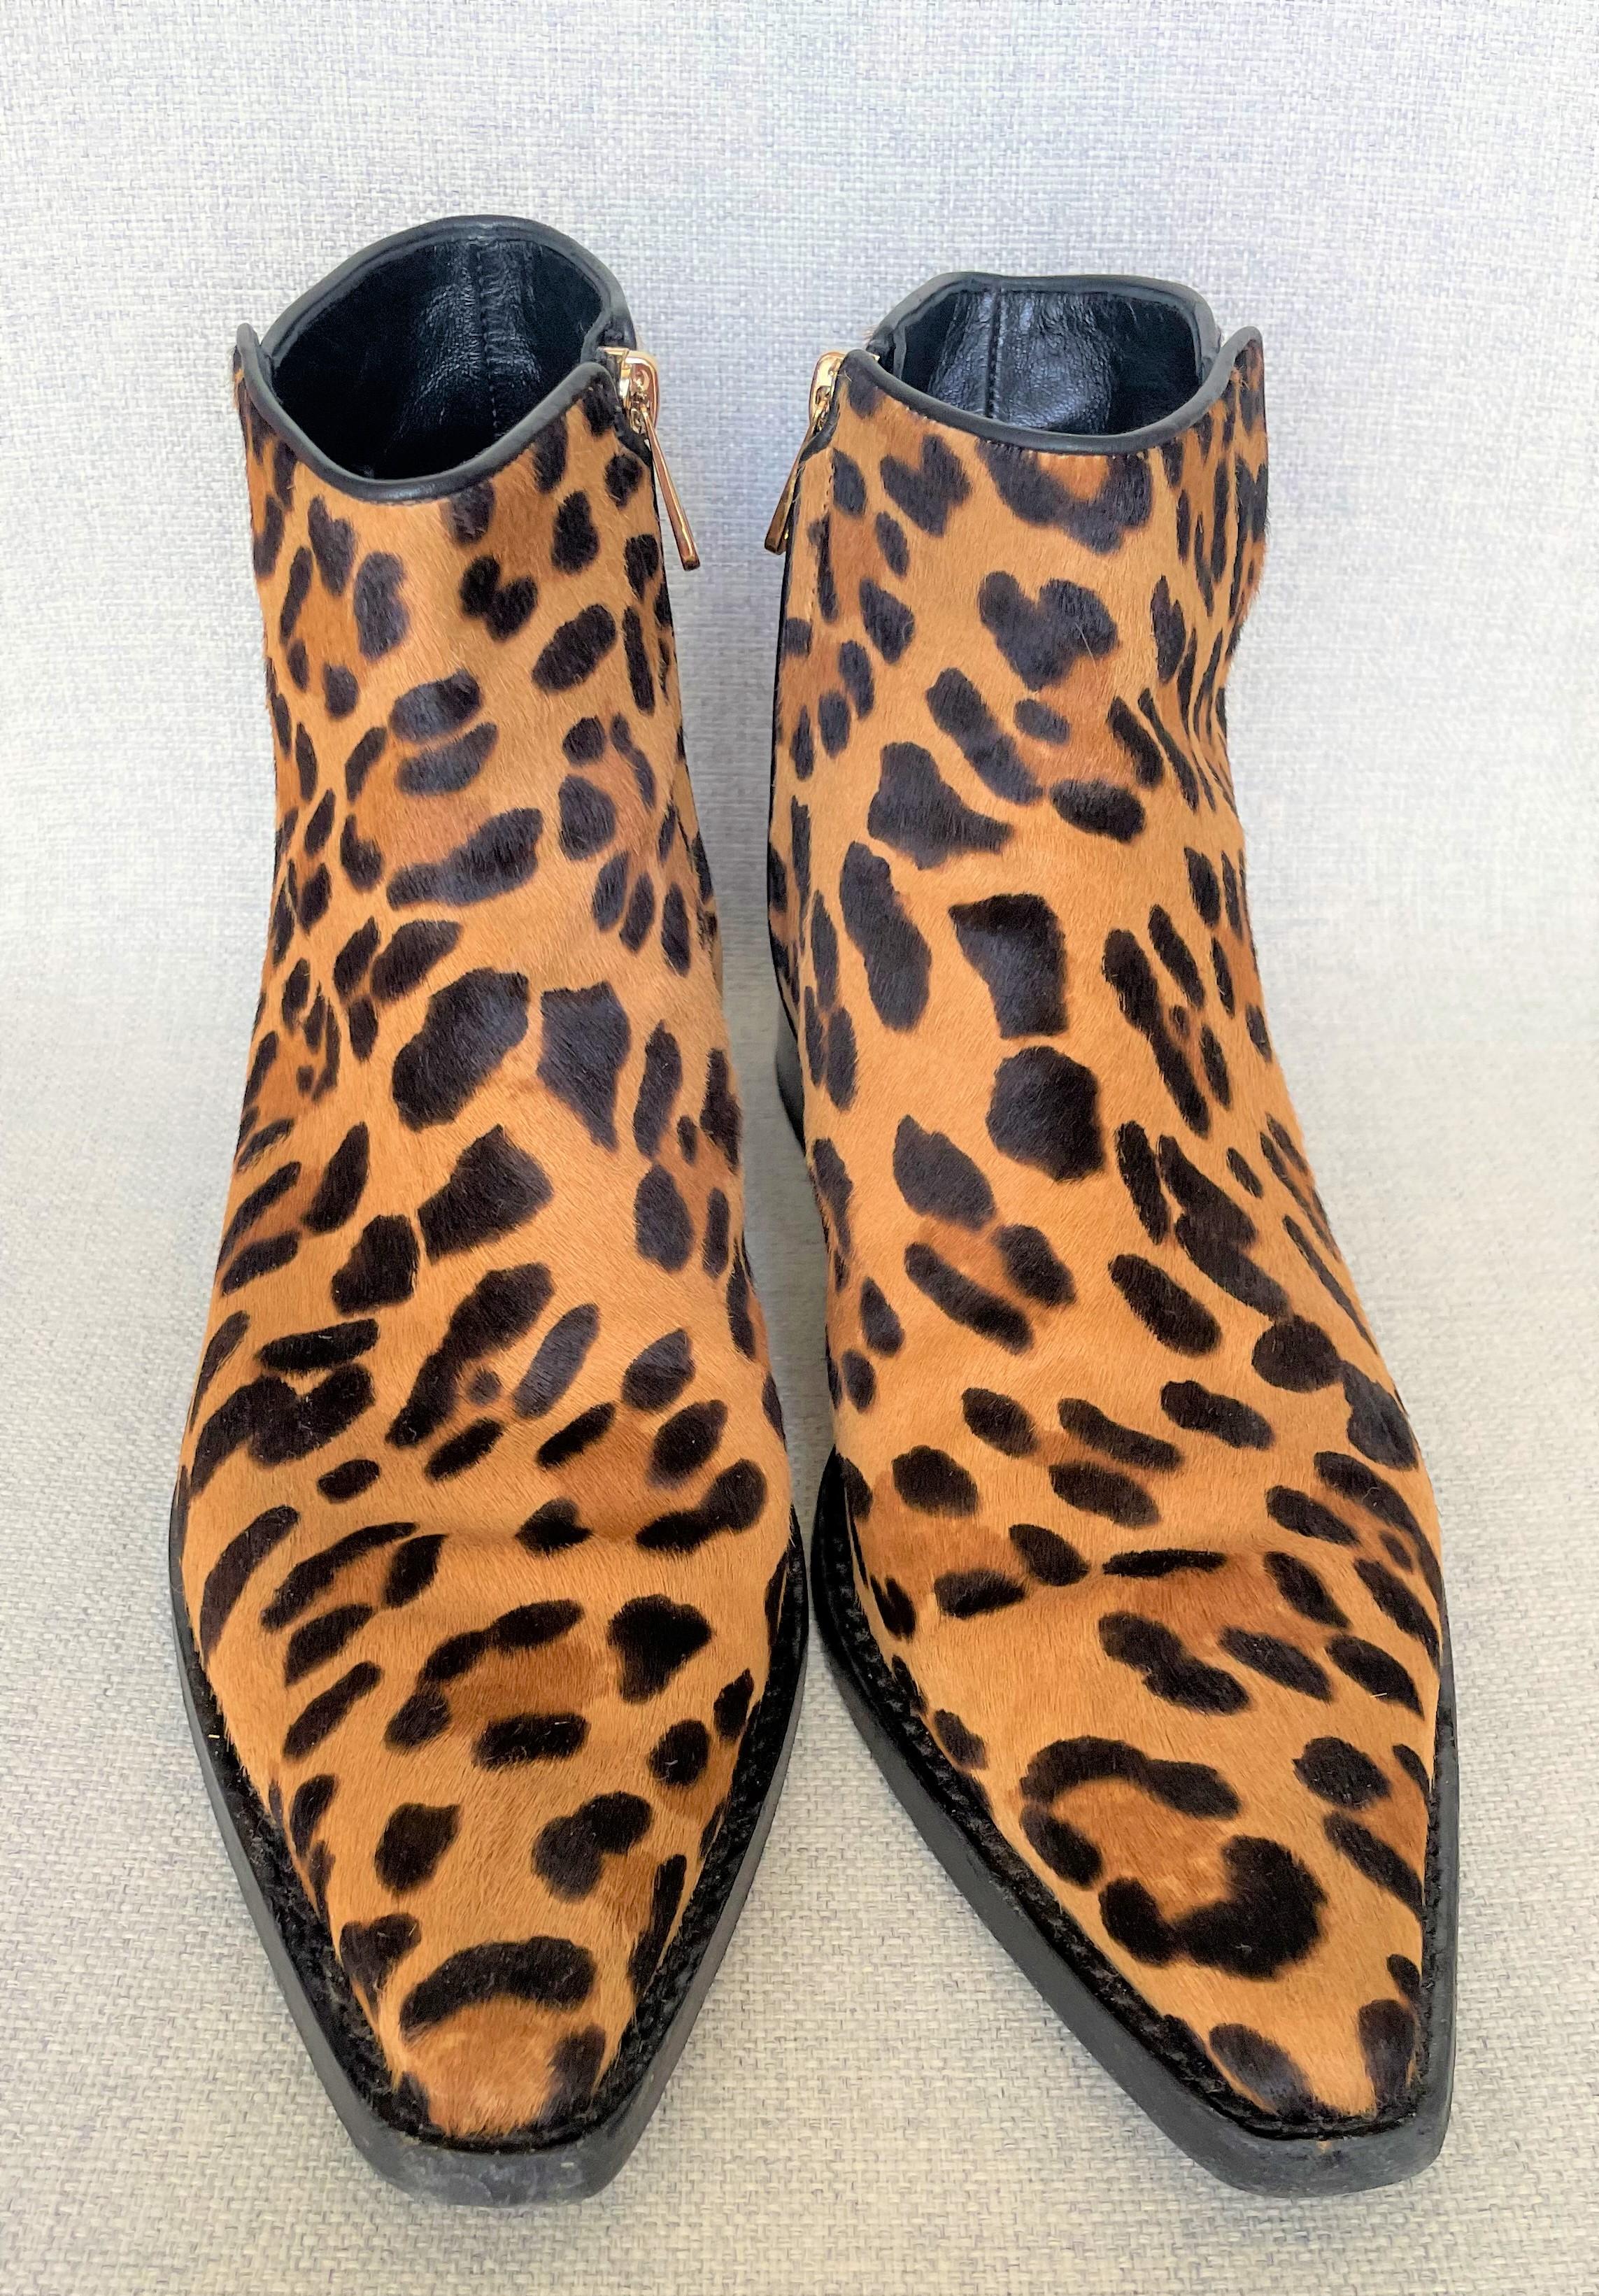 Gorgeous and very rare 100% authentic D&G Leopard Ankle Boots size 41 made from 91% ponyskin.
A leather bottom sole. A pointed toe. A side zipper with gold-tone logo. 

Design: These ankle boots are characterized by their distinctive leopard print,